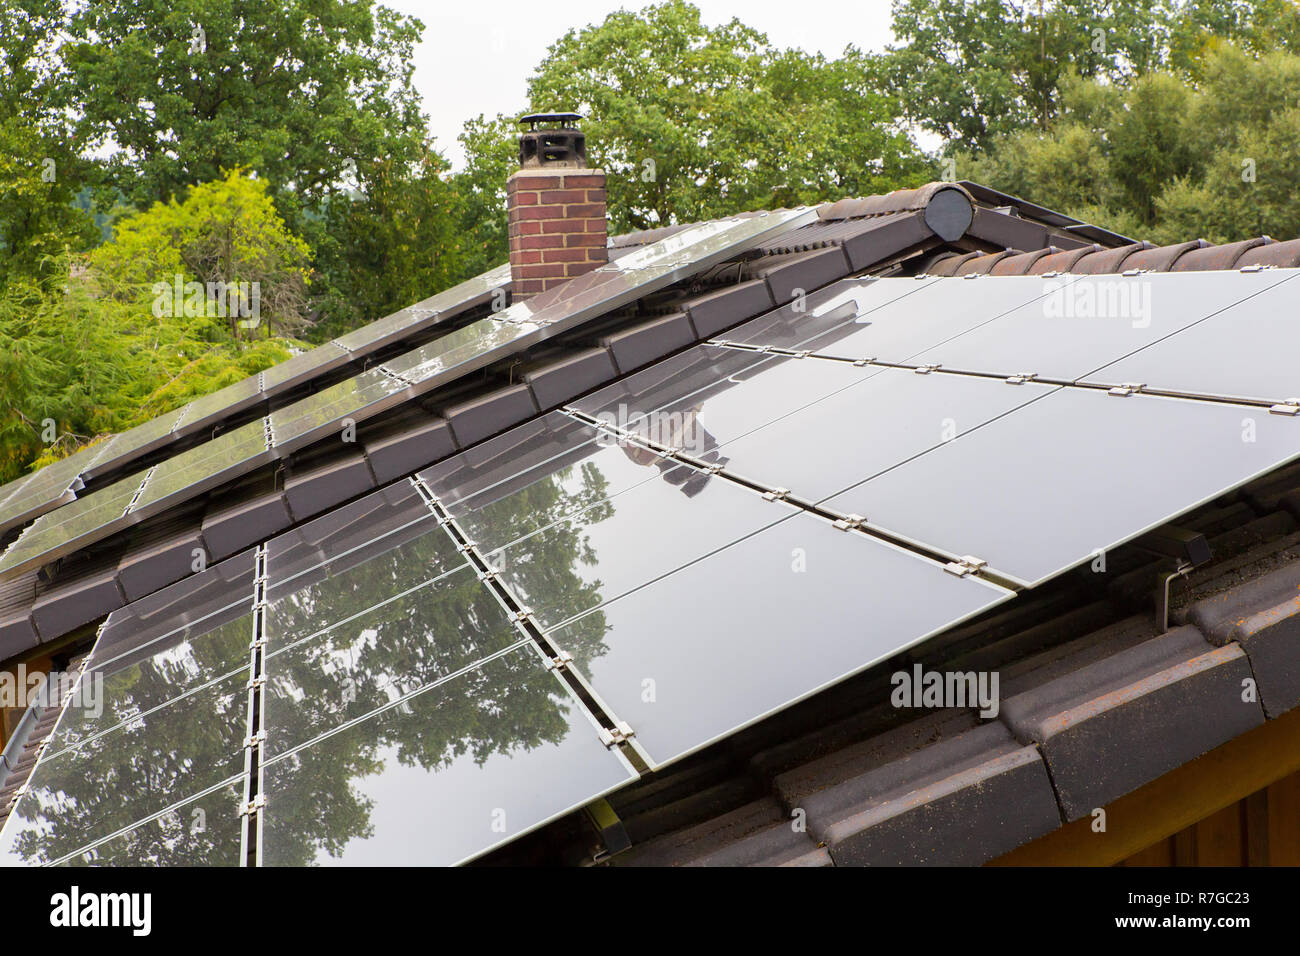 Roof surface of home with black solar collectors Stock Photo